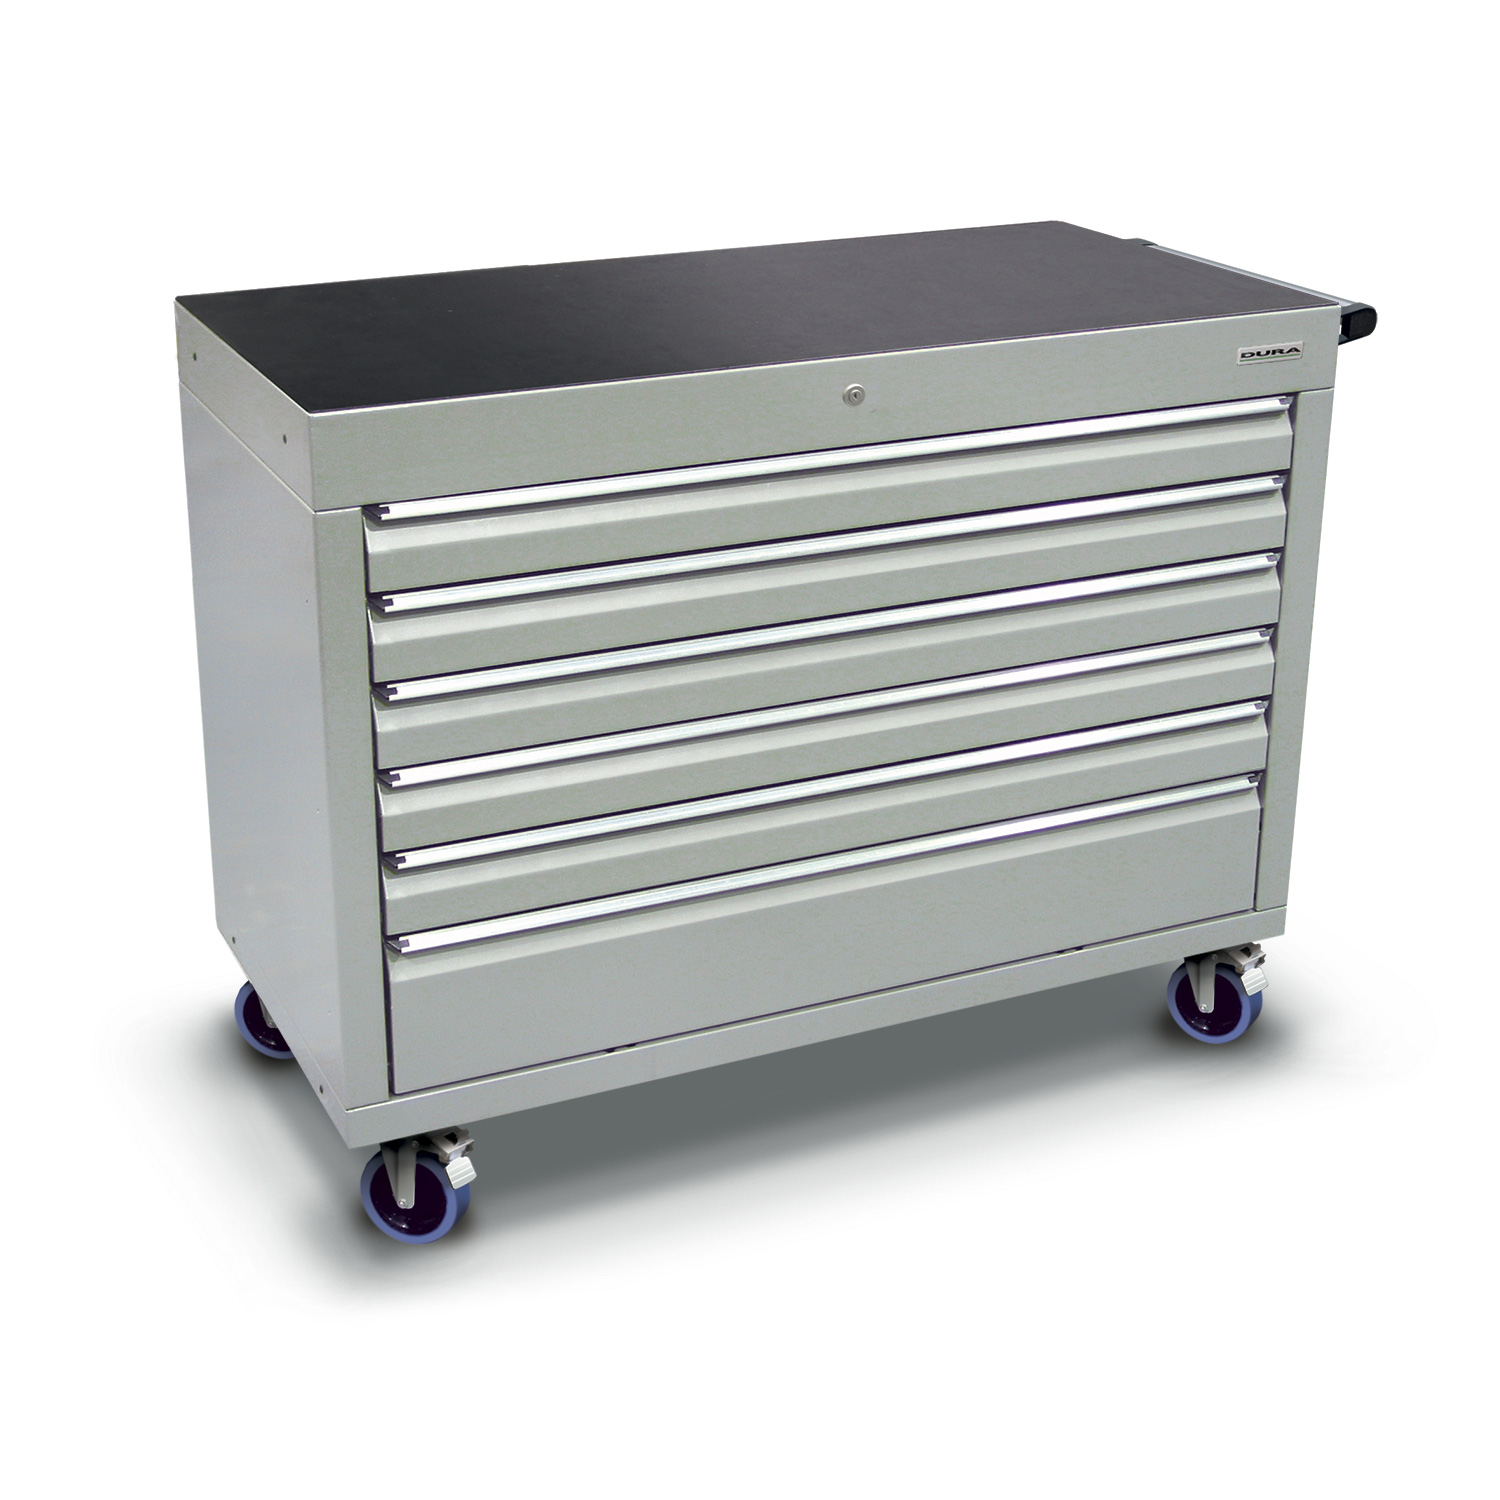 1200 series cabinet with 6 drawers (5 medium, 1 large) and castors